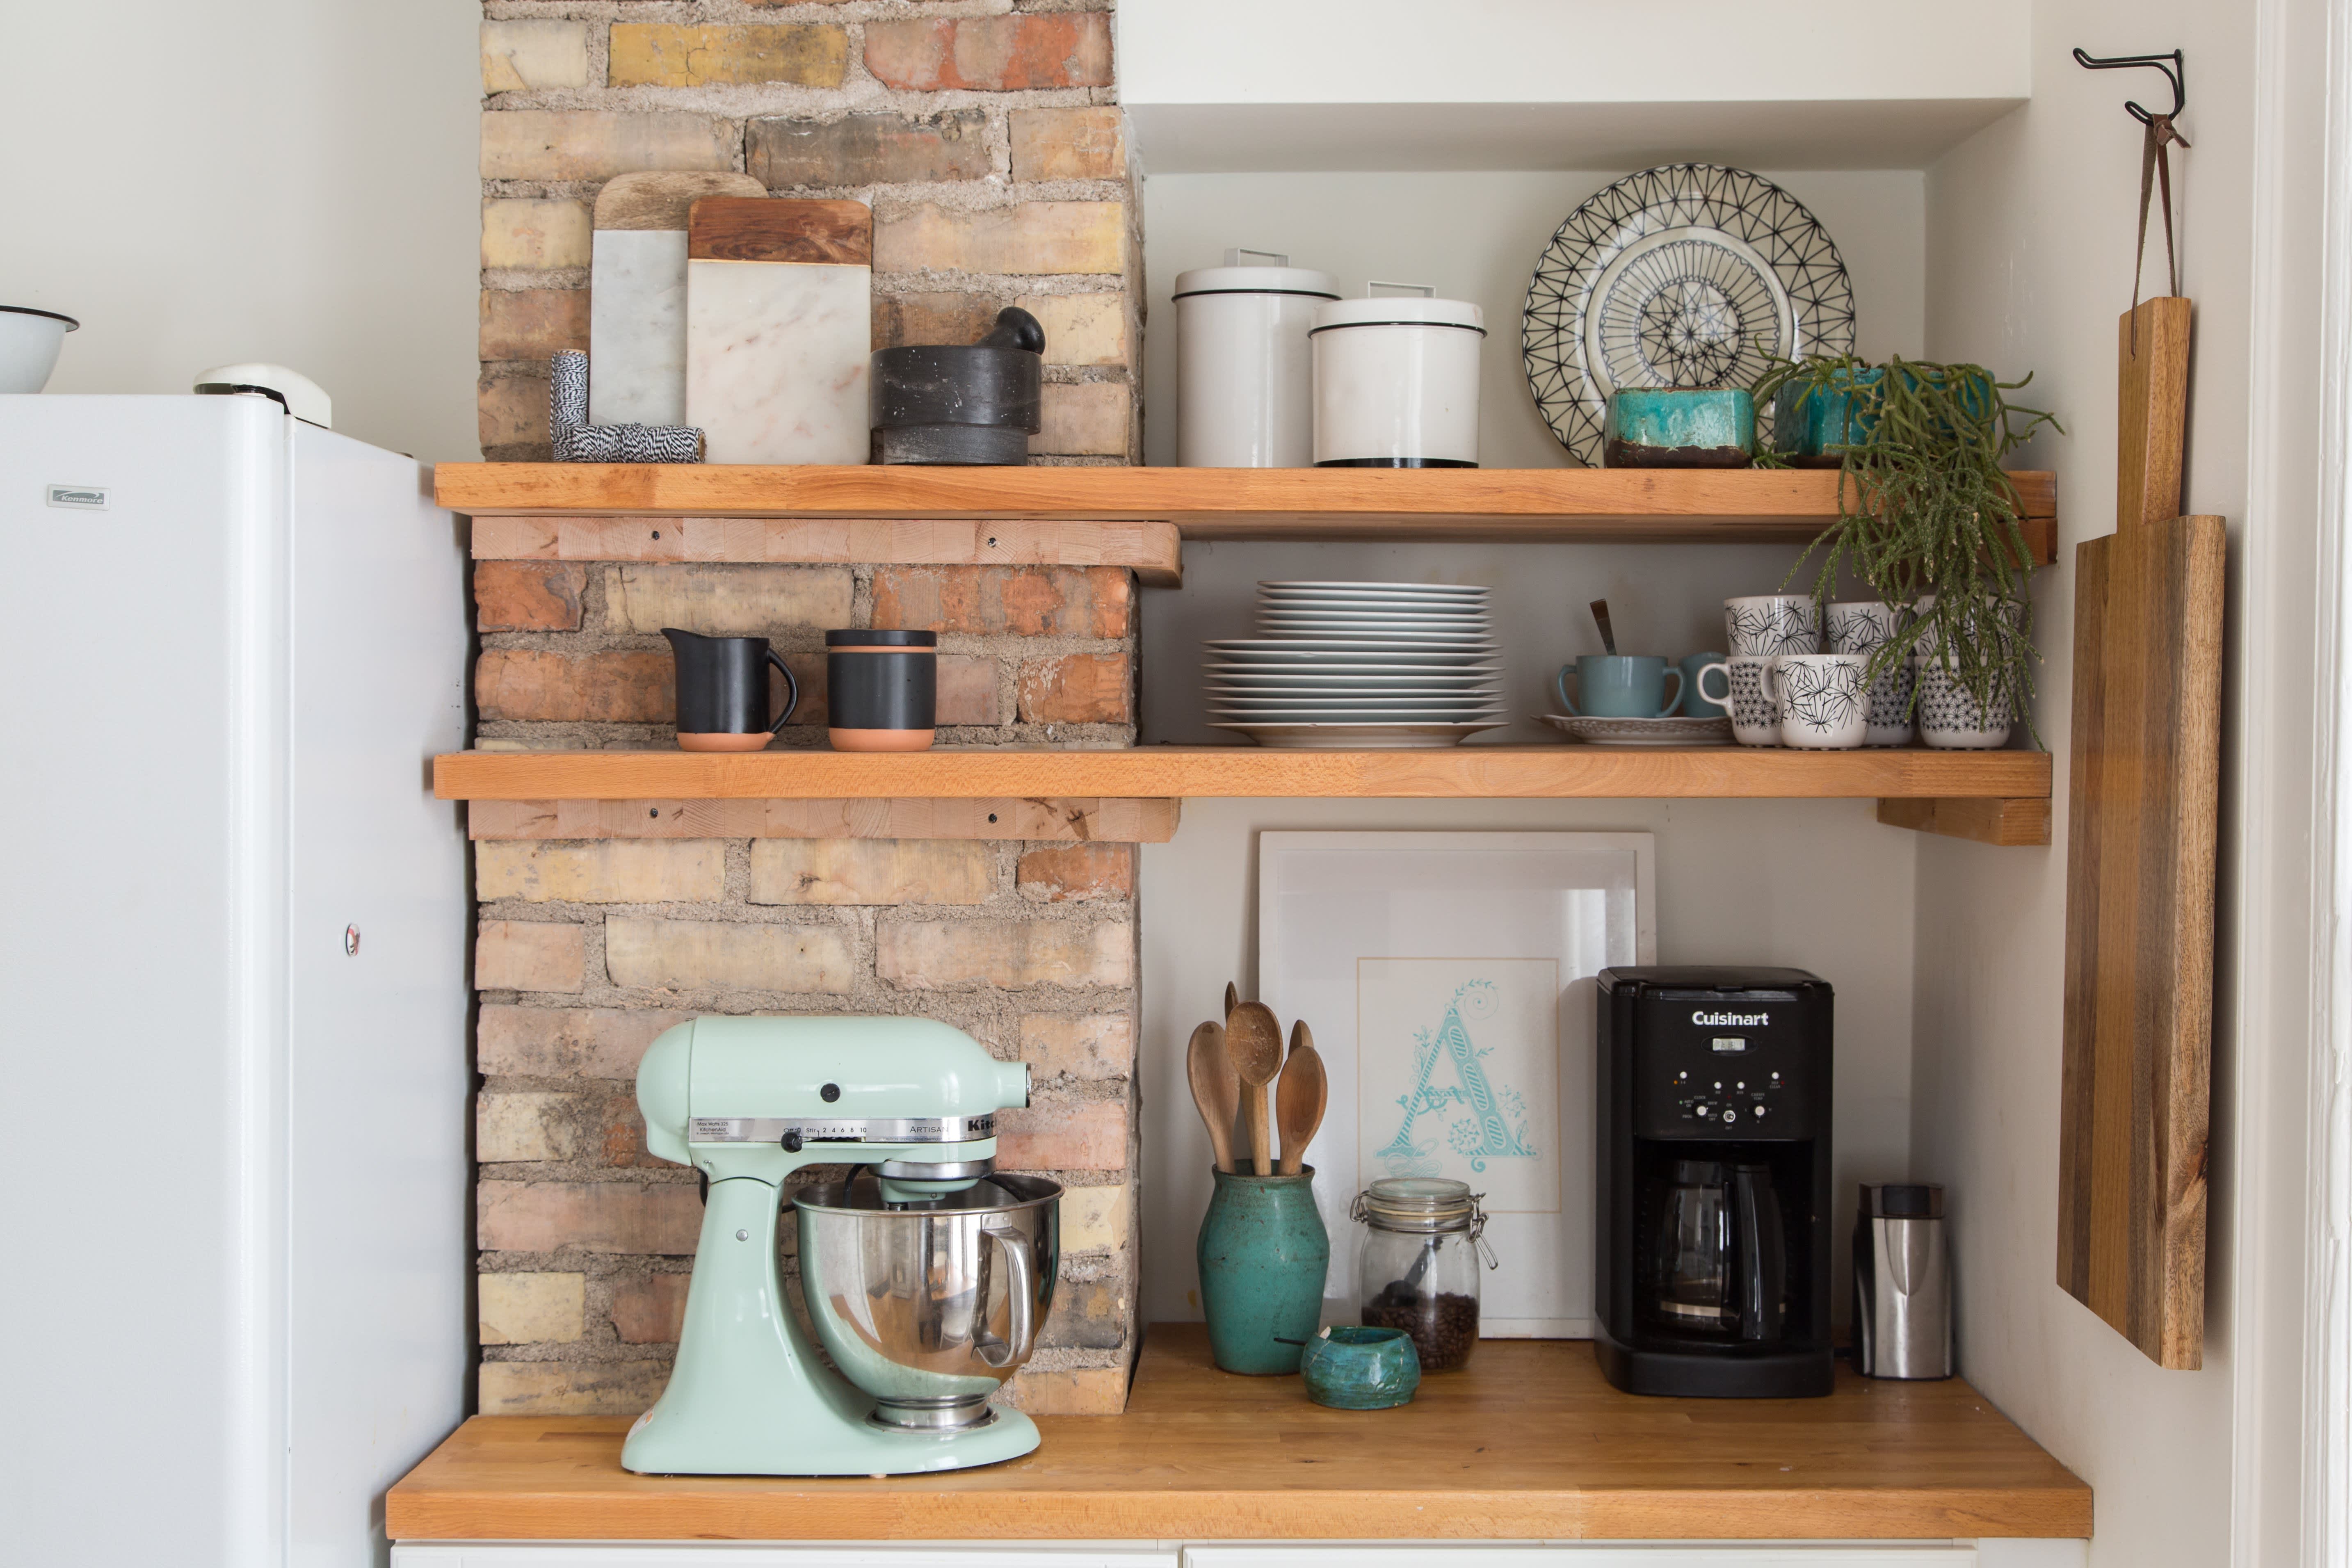 Small Appliances Every Kitchen Needs